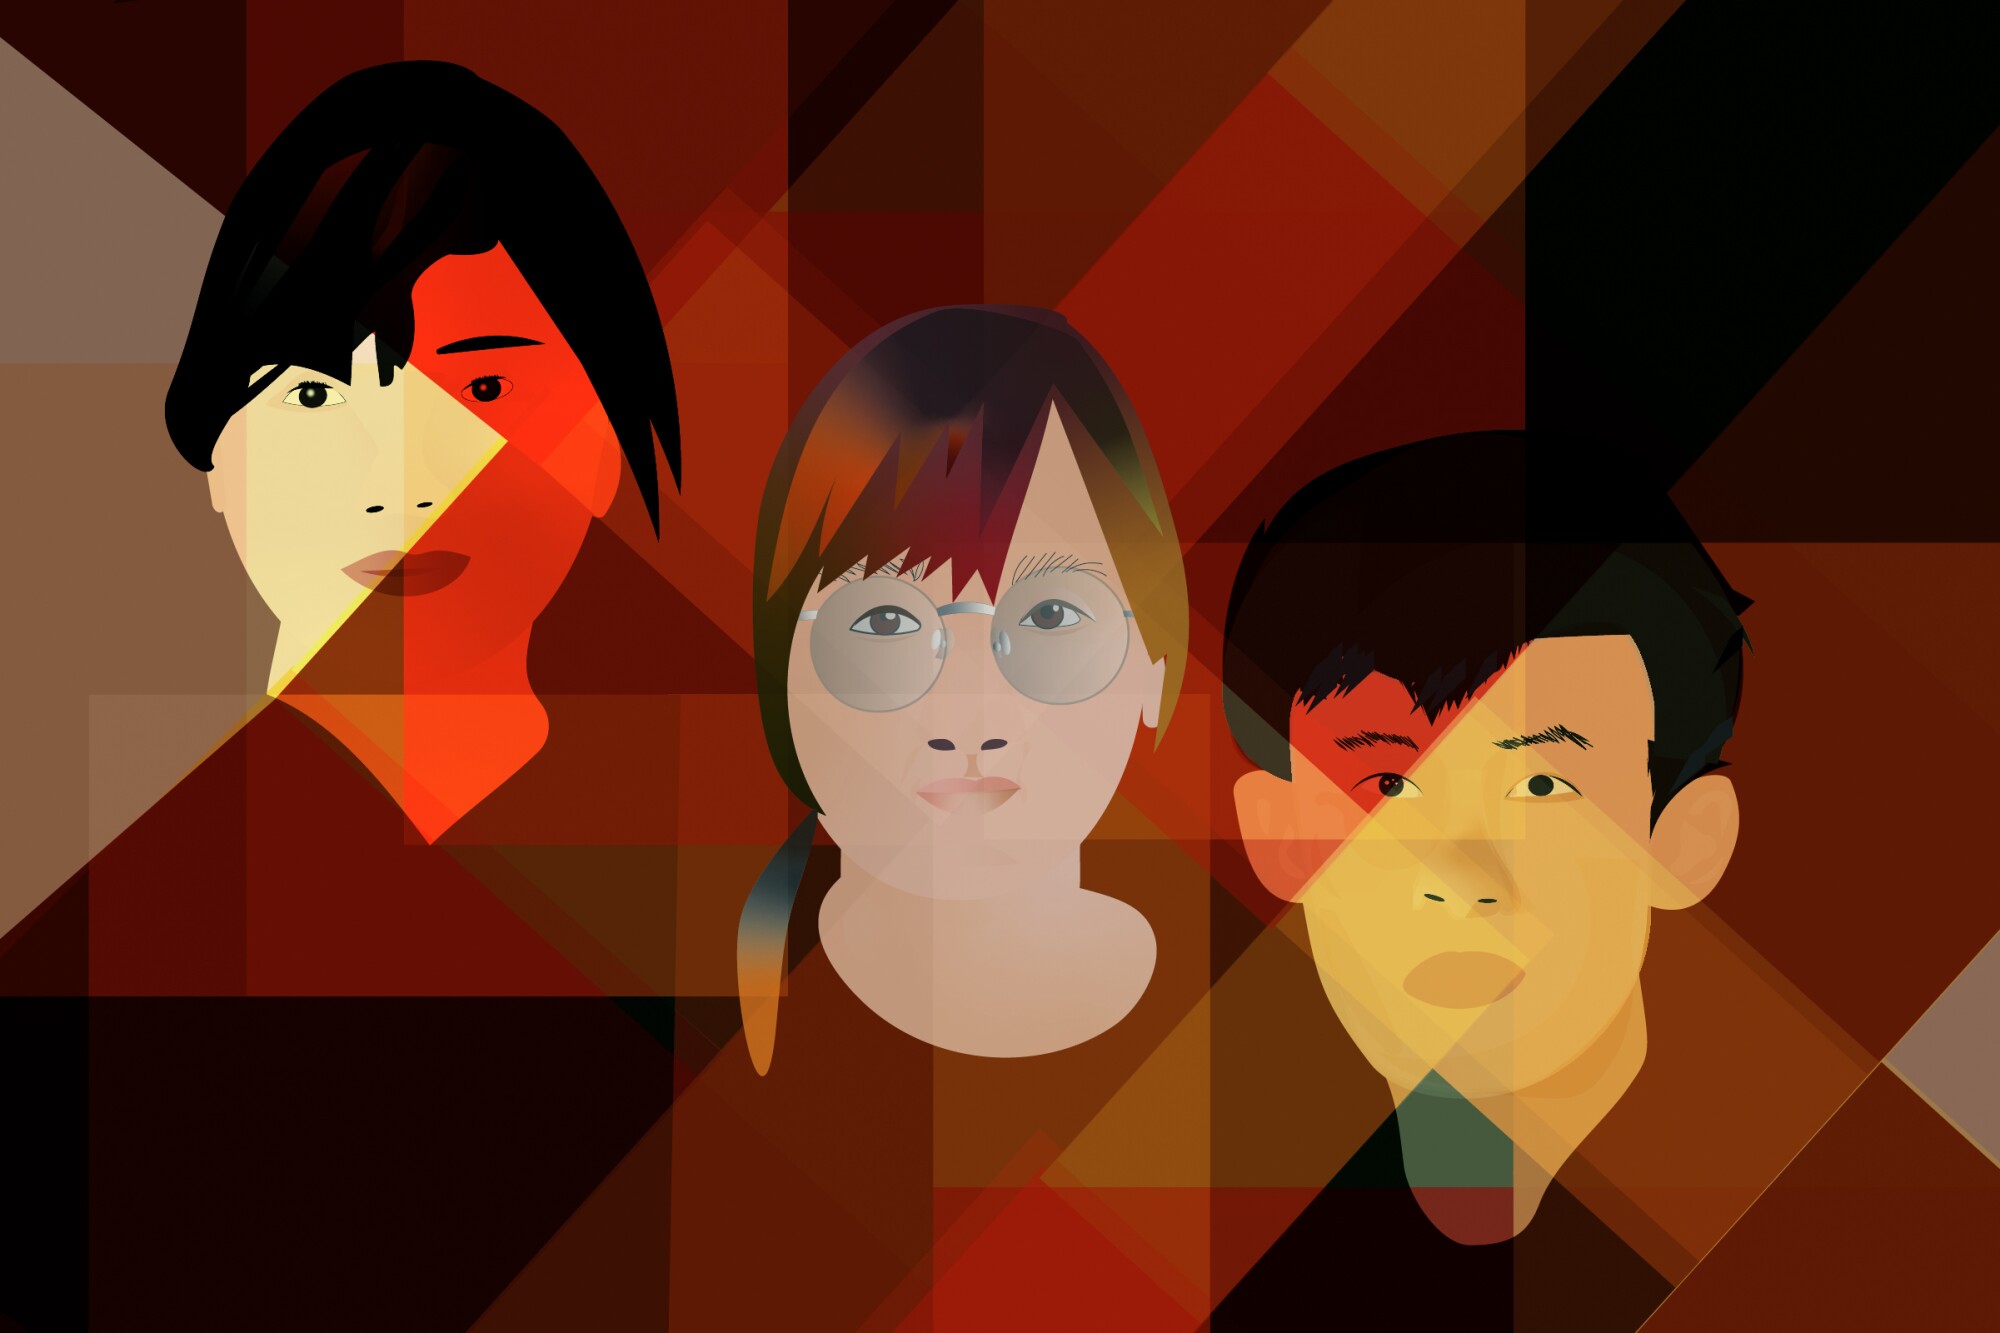 Illustration of Ei Thinzar Maung on left, Benja Apan in middle and Ivan Choi on right on a dark red background.